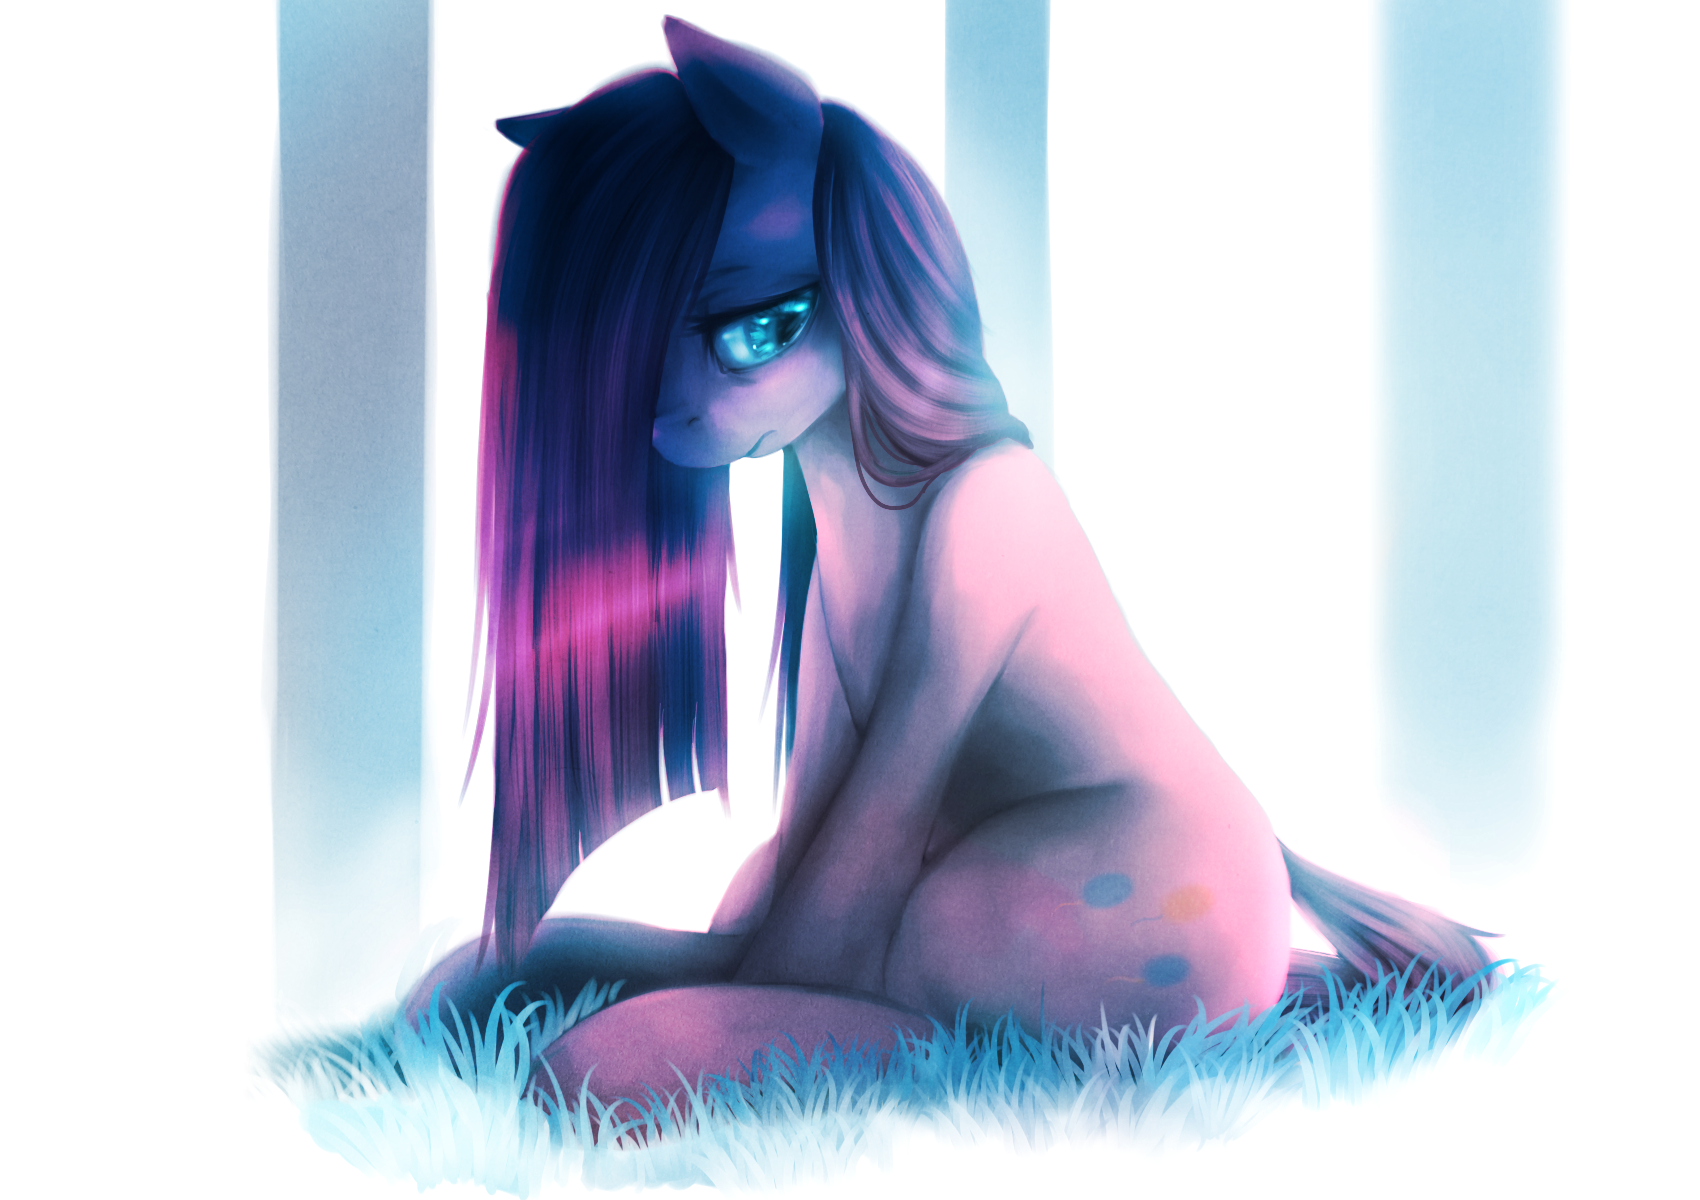 lifeforms_by_ventious-d8sg8kb.png